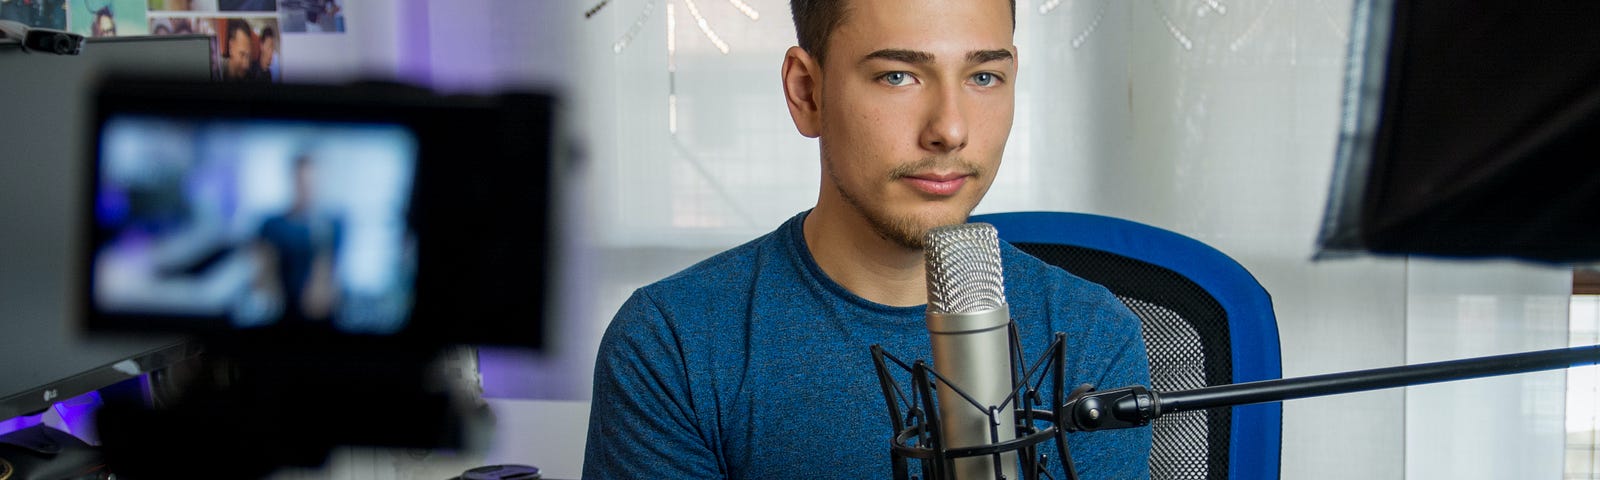 A white man with slicked back brown hair sits behind a filming set-up with a silver microphone propped up near his mouth on the left and a camera aimed towards his face on the right. He is wearing a cerulean blue t-shirt, has short facial hair, and majestic eyebrows. He is looking at the photographer with a somber expression.